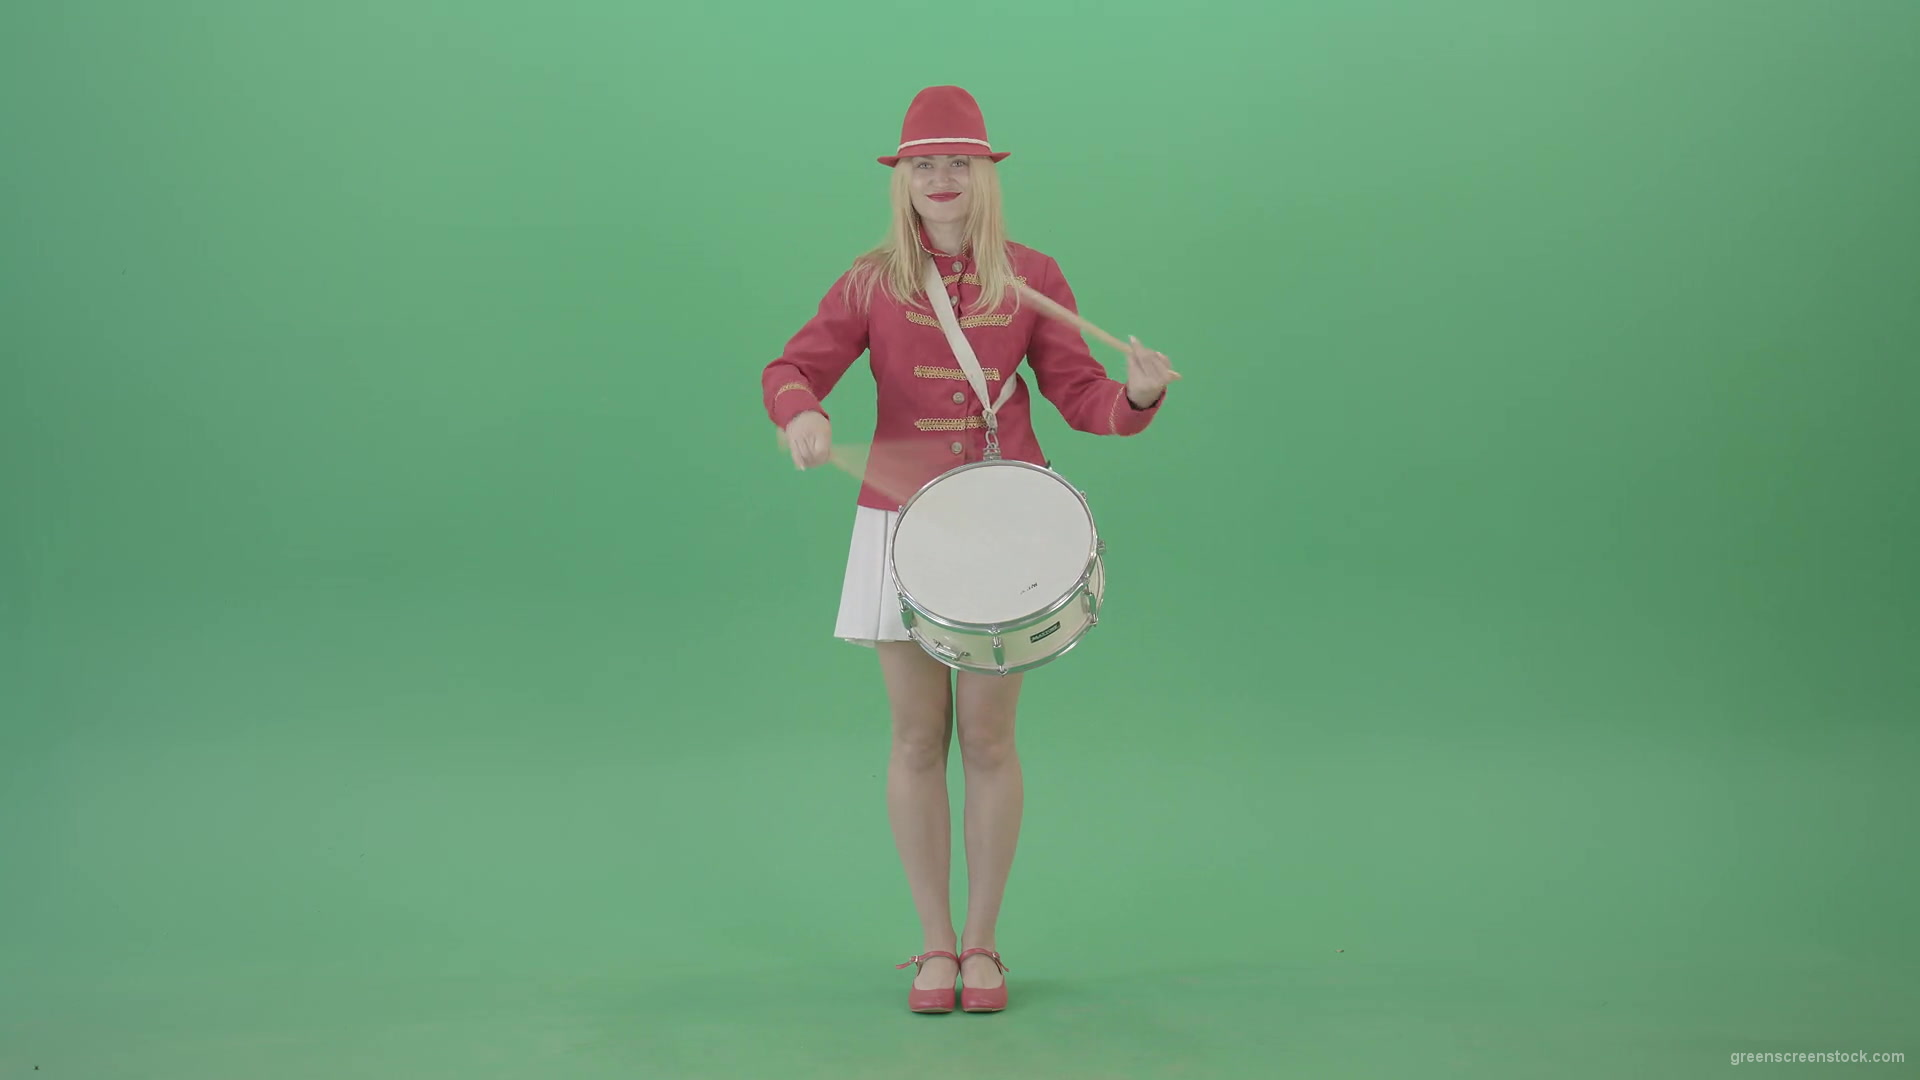 Girl-fast-playing-drum-music-instrument-isolated-on-Green-Background-4K-Video-Footage-1920_005 Green Screen Stock